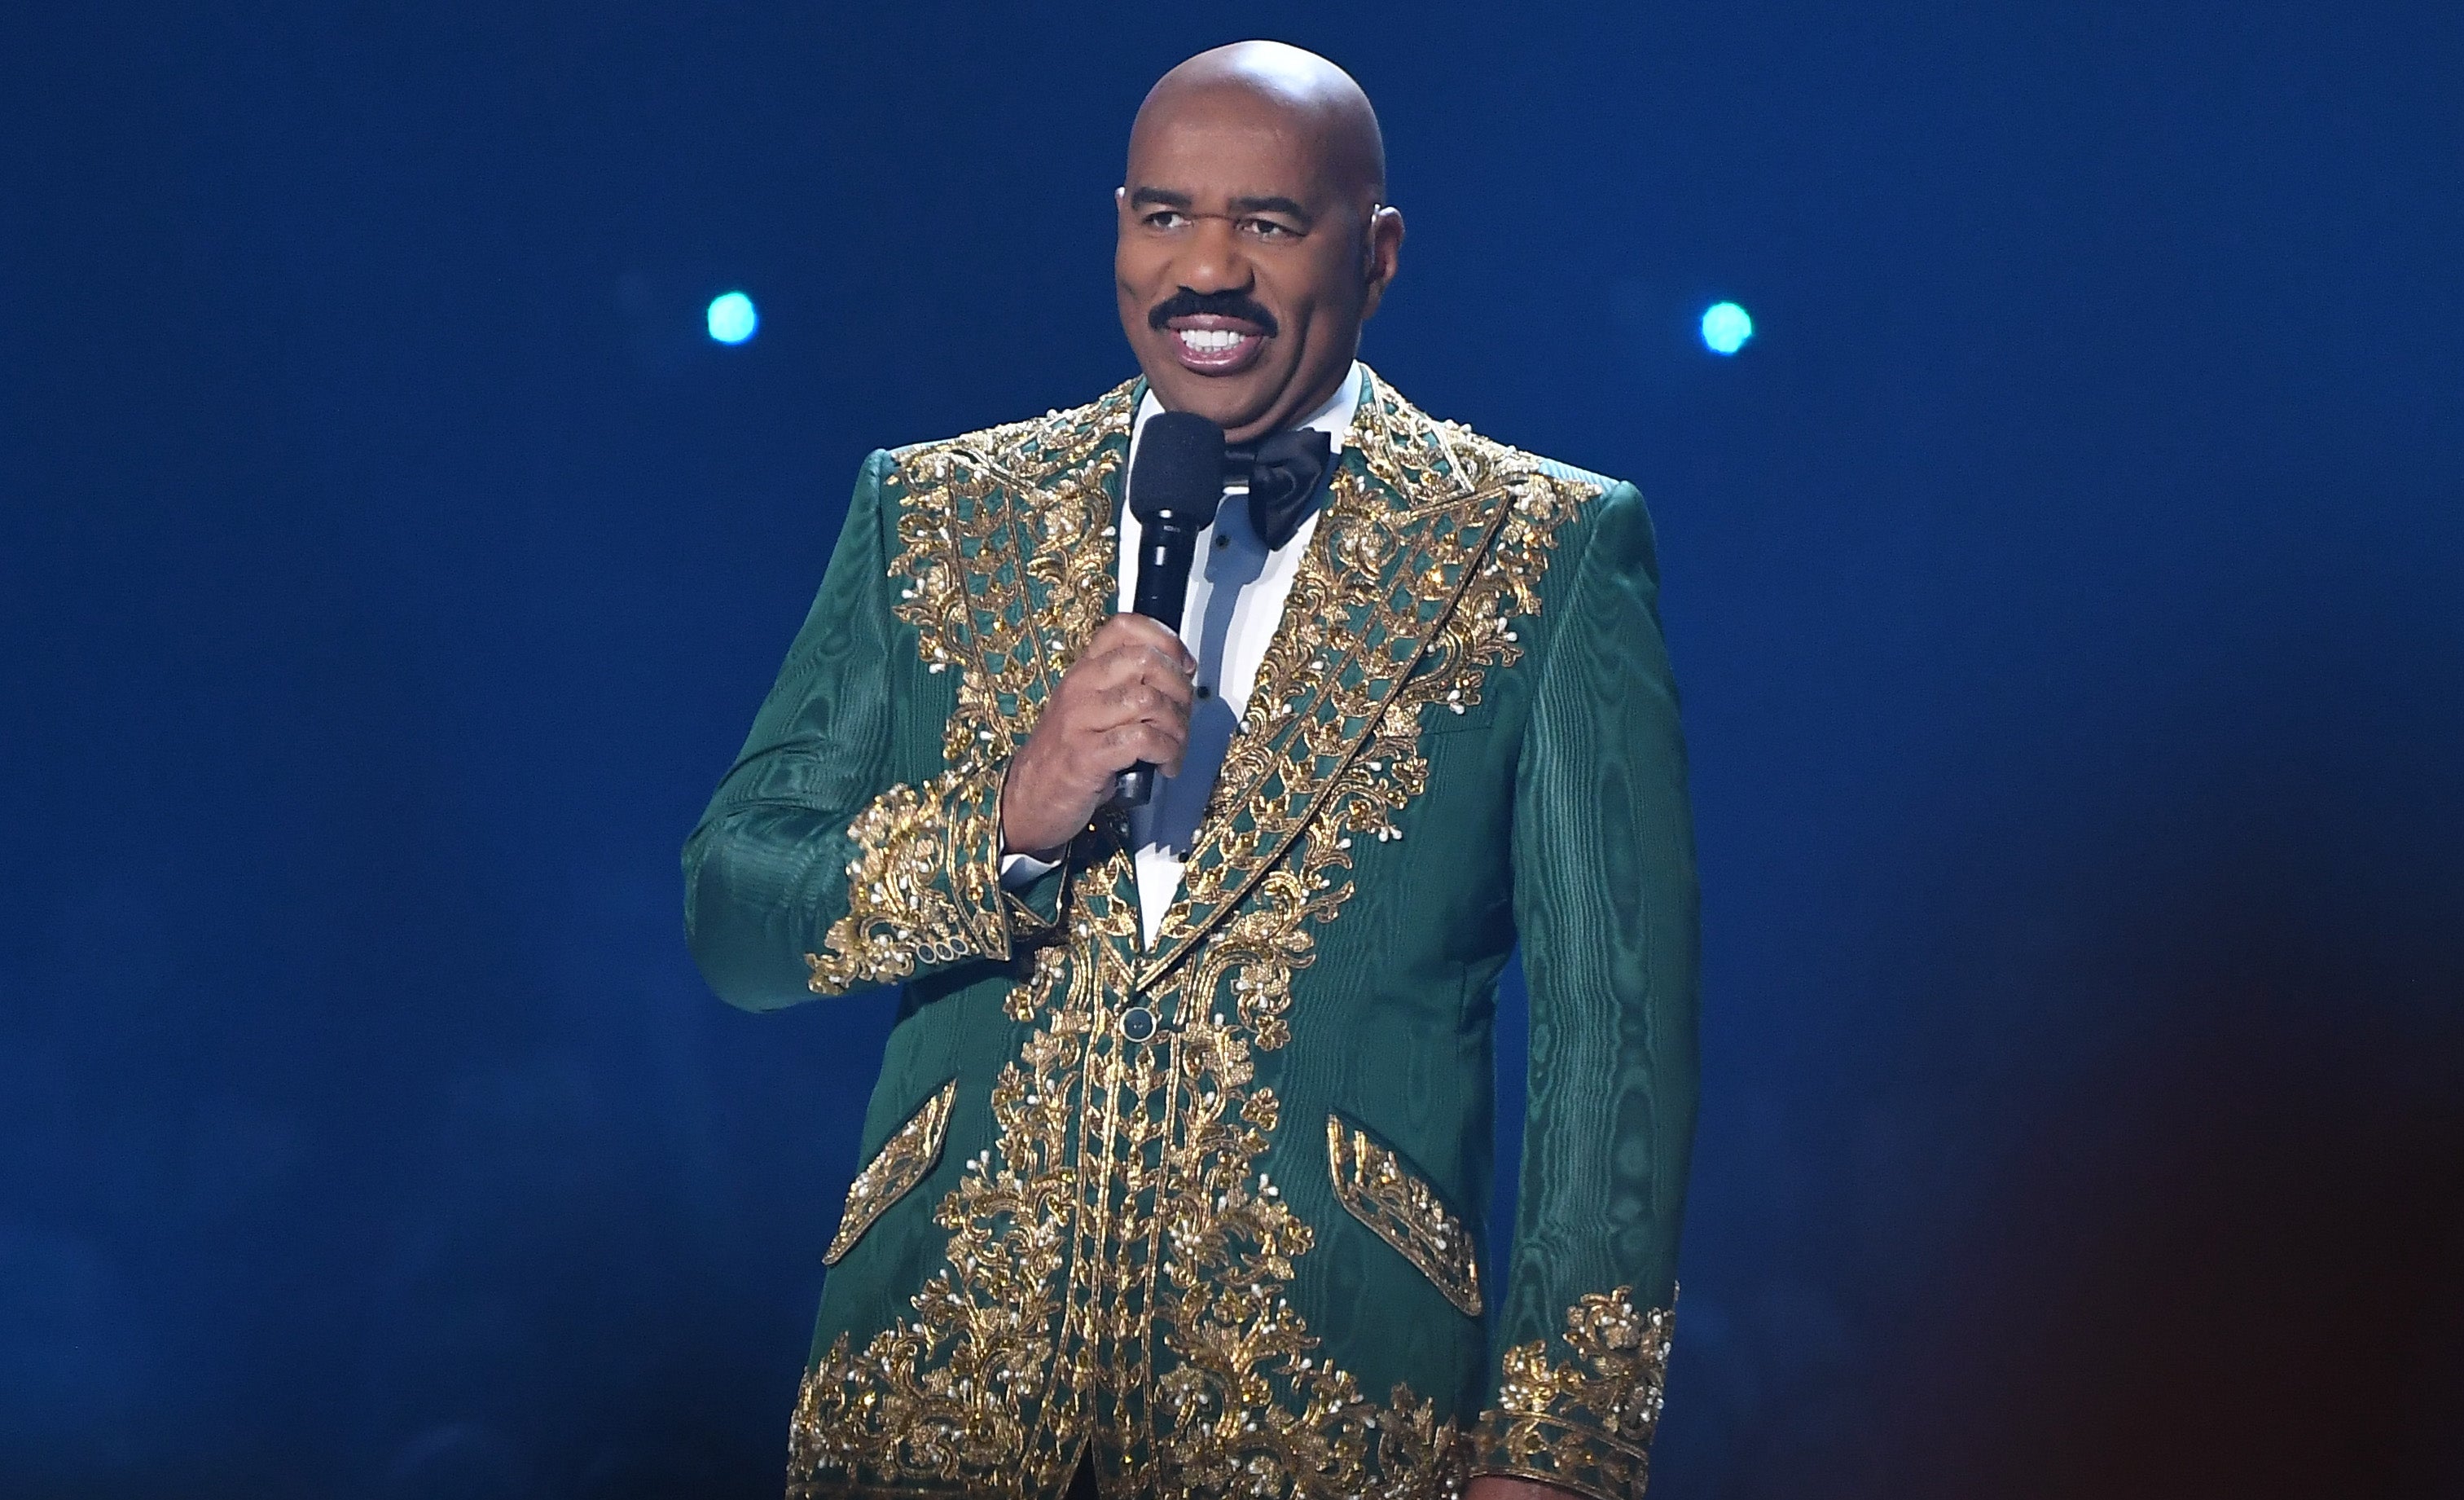 Steve Harvey Seemingly Mixes Up Names Of Miss Universe Contestants Again: 'Quit Doing This To Me'